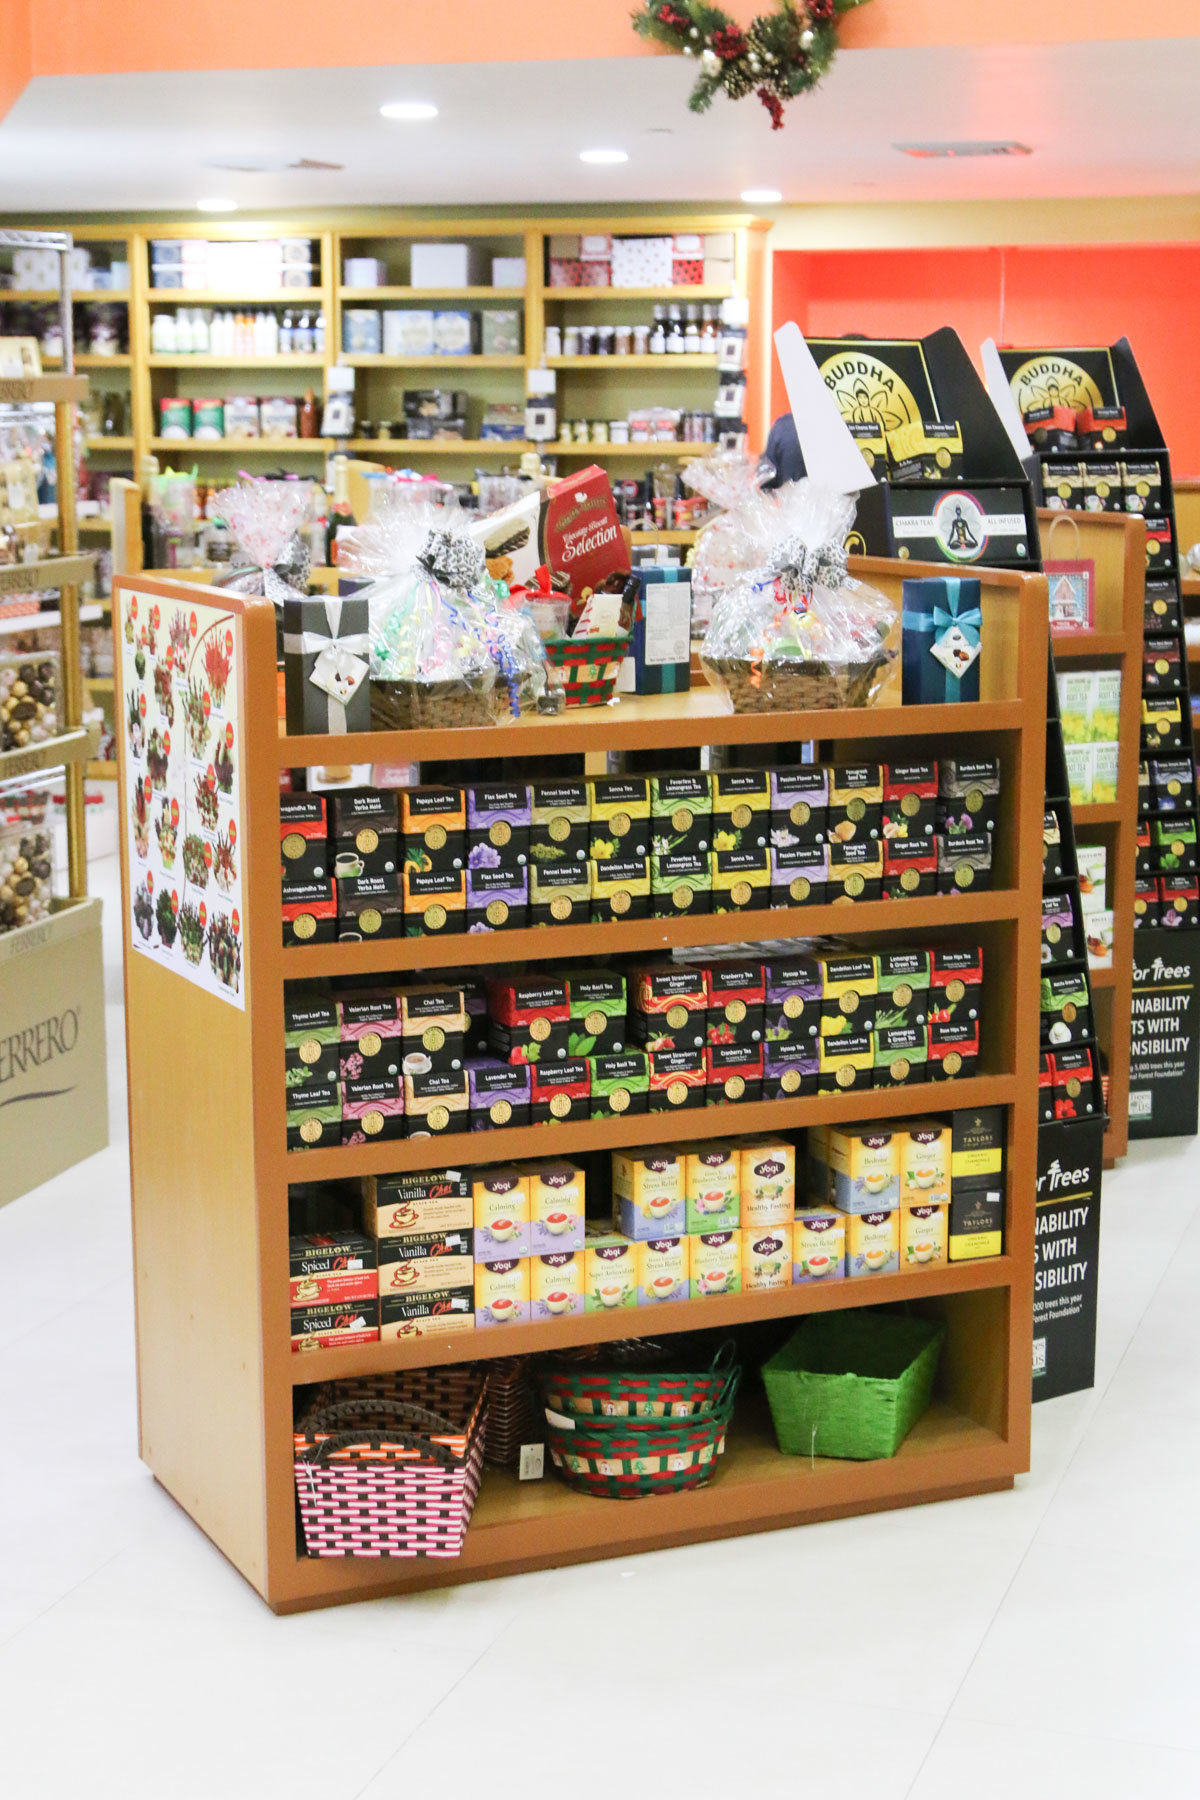 Promo shot of a store shelf with products. Photo by Ross Photography, Trinidad, W.I..